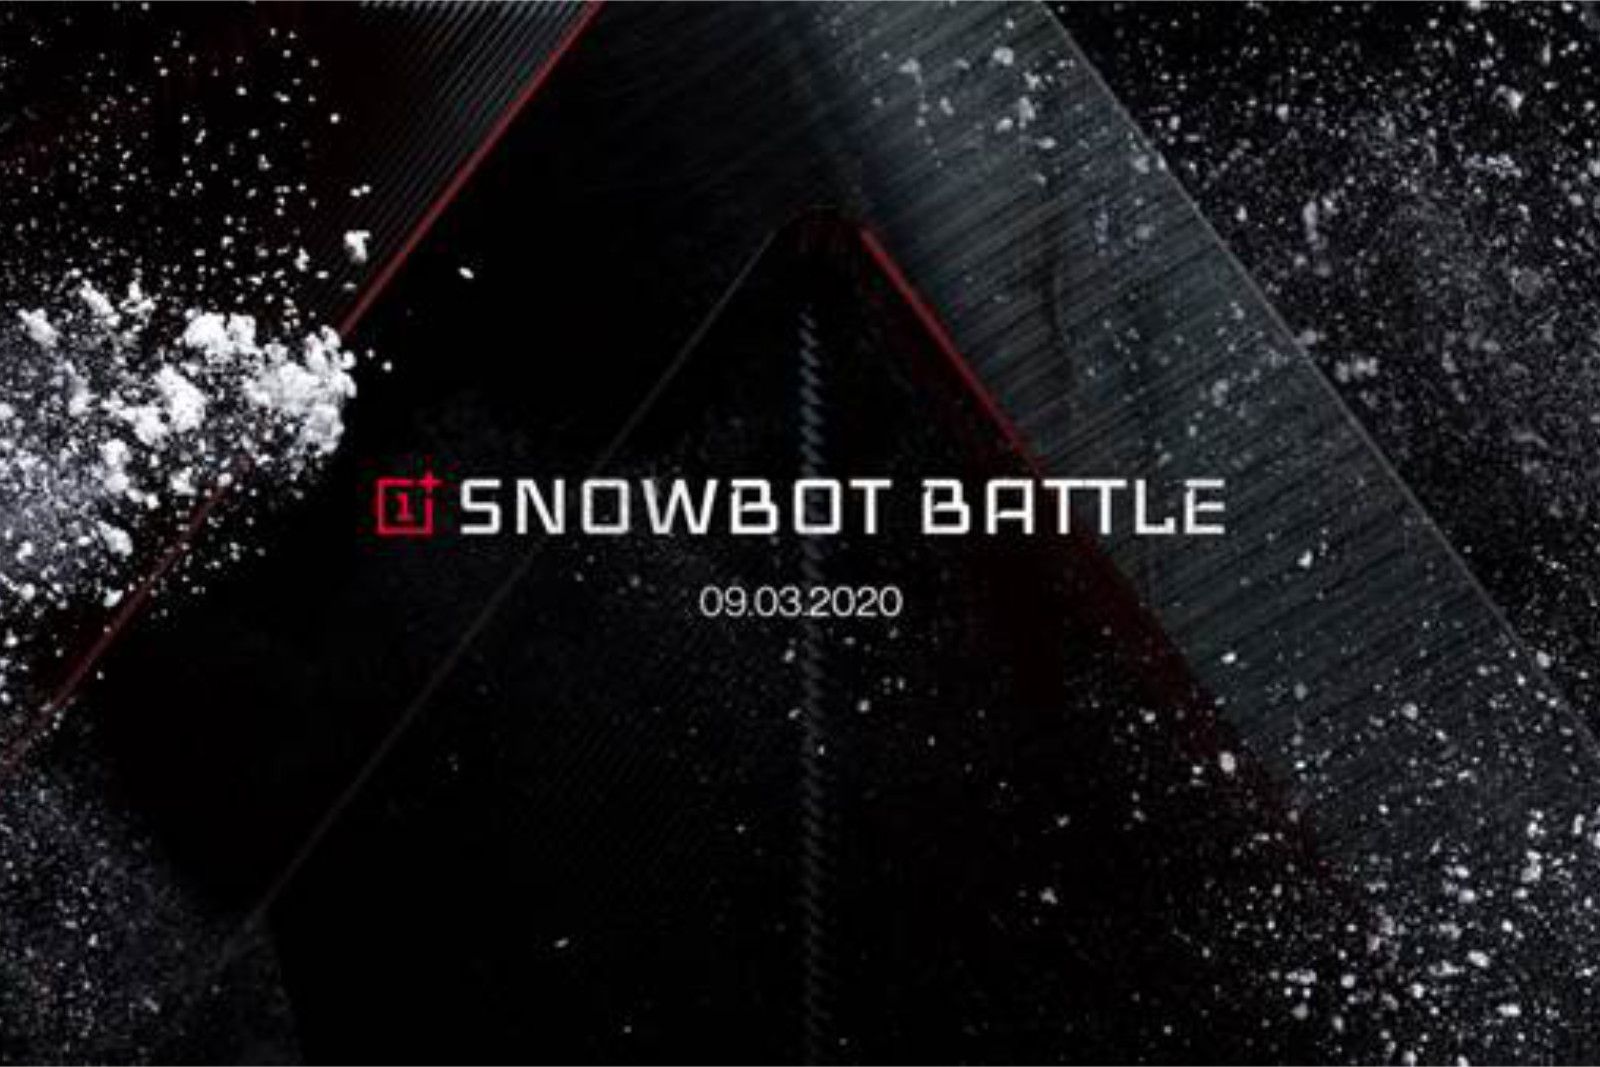 OnePlus announces Snowbot A 5G equipped snowball-hurling robot you can control image 1